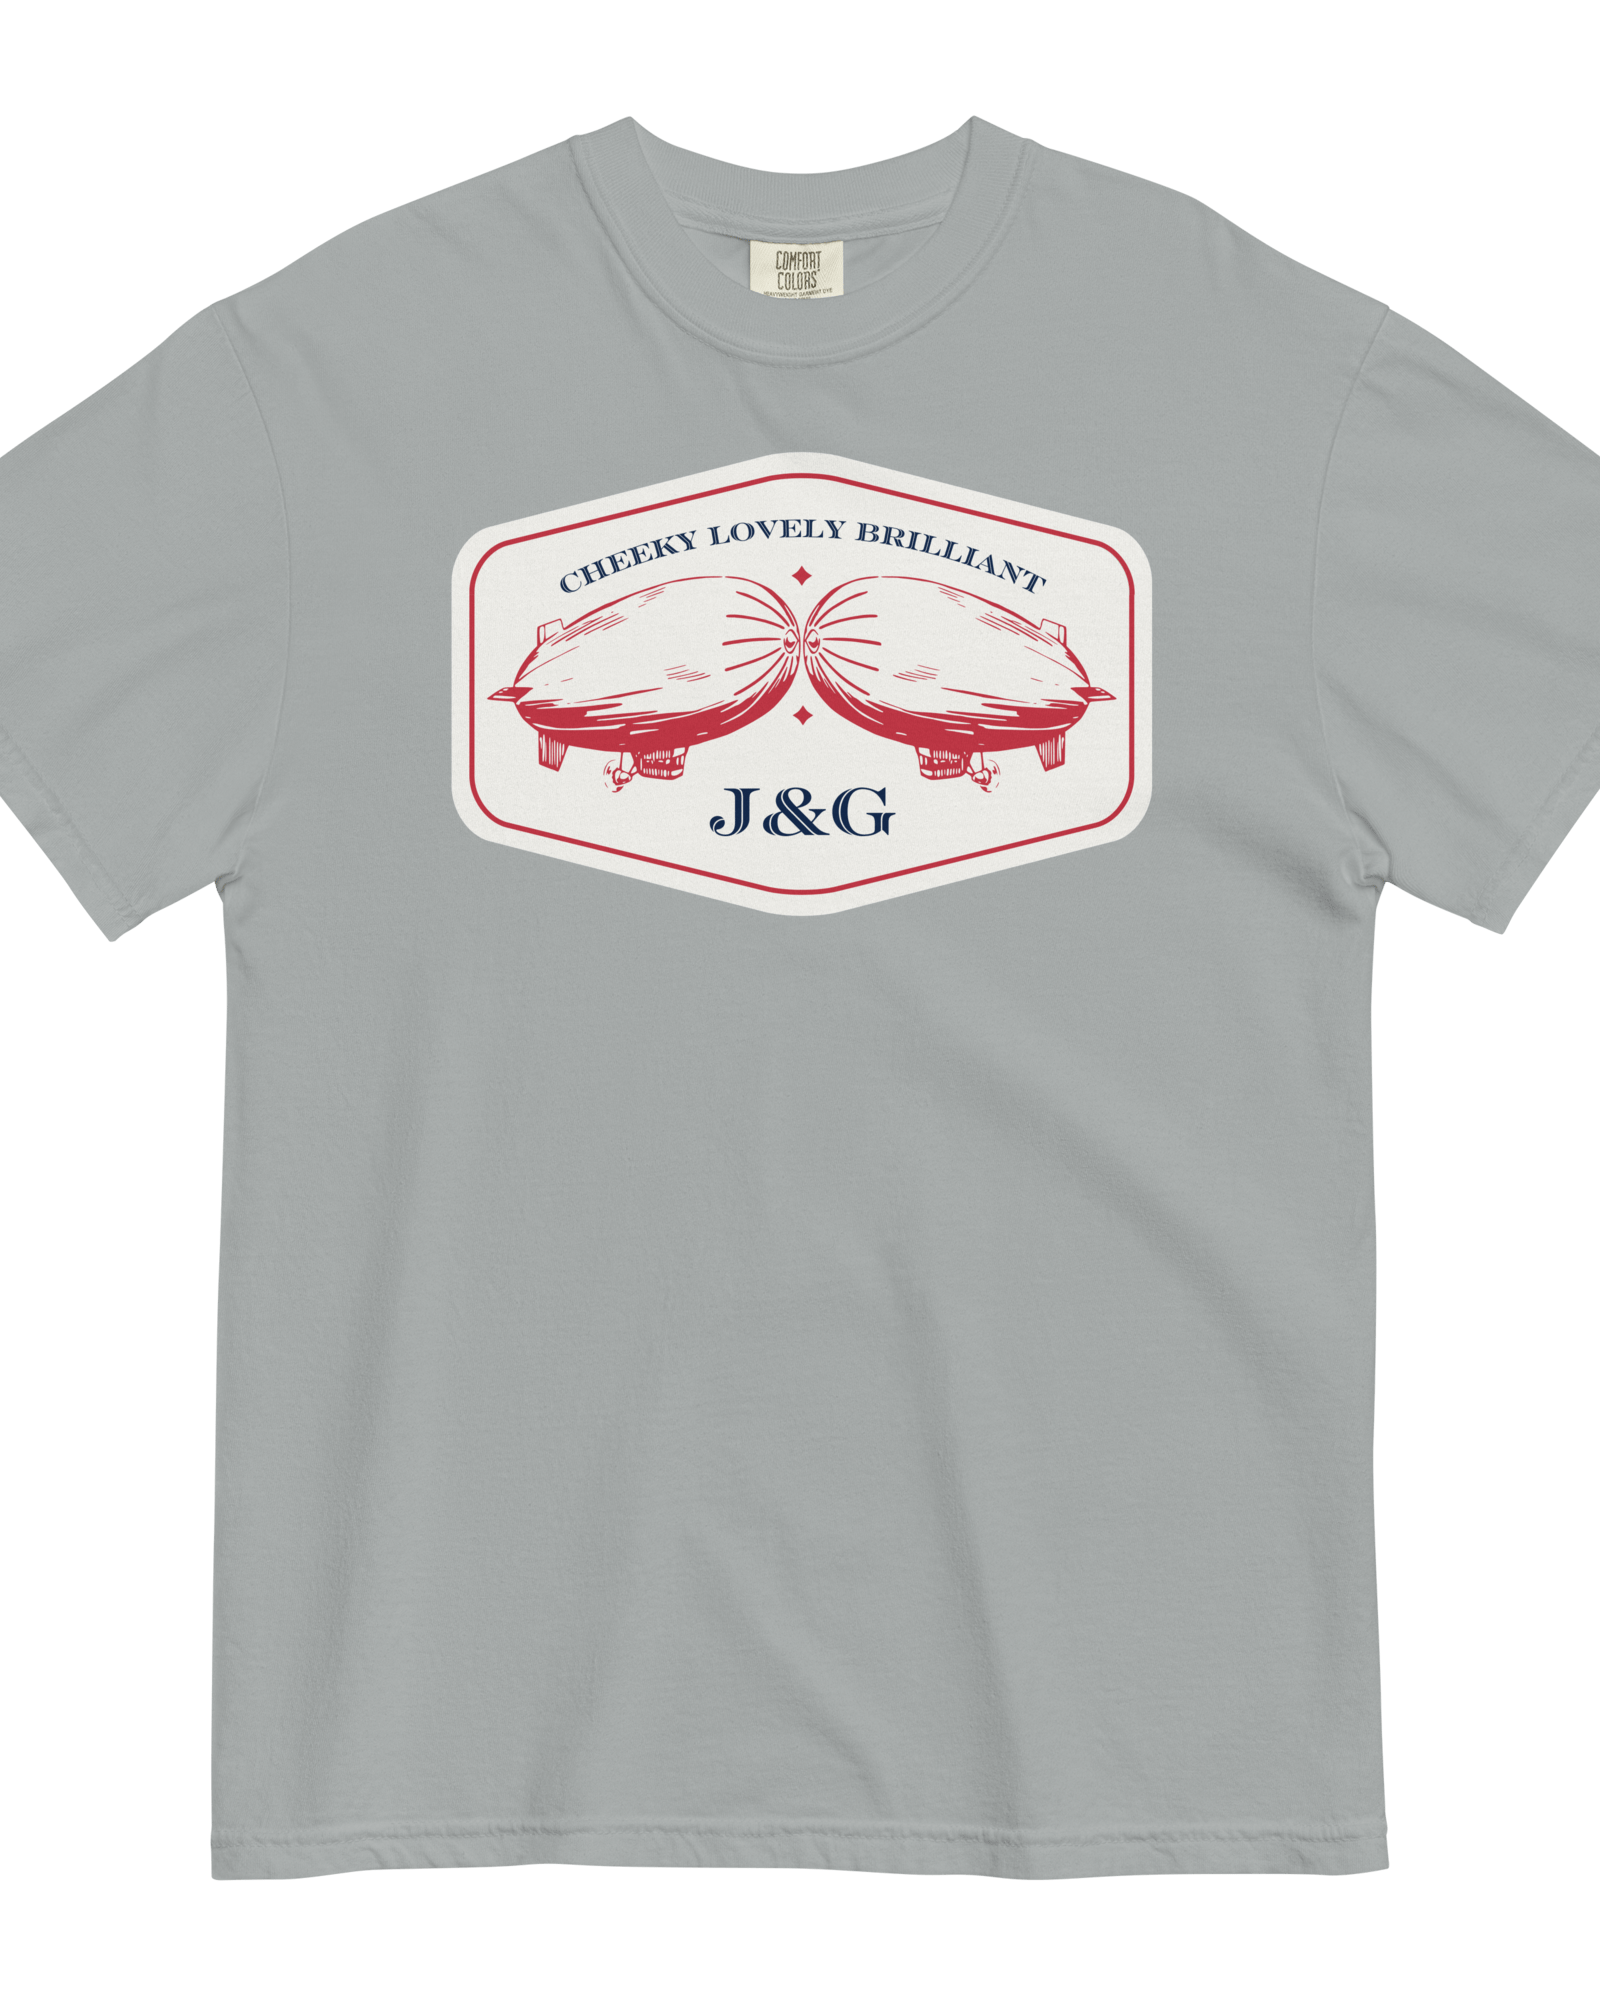 Cheeky Lovely Brilliant Airships T-shirt | Garment-Dyed Heavyweight Cotton Granite / S Shirts & Tops Jolly & Goode